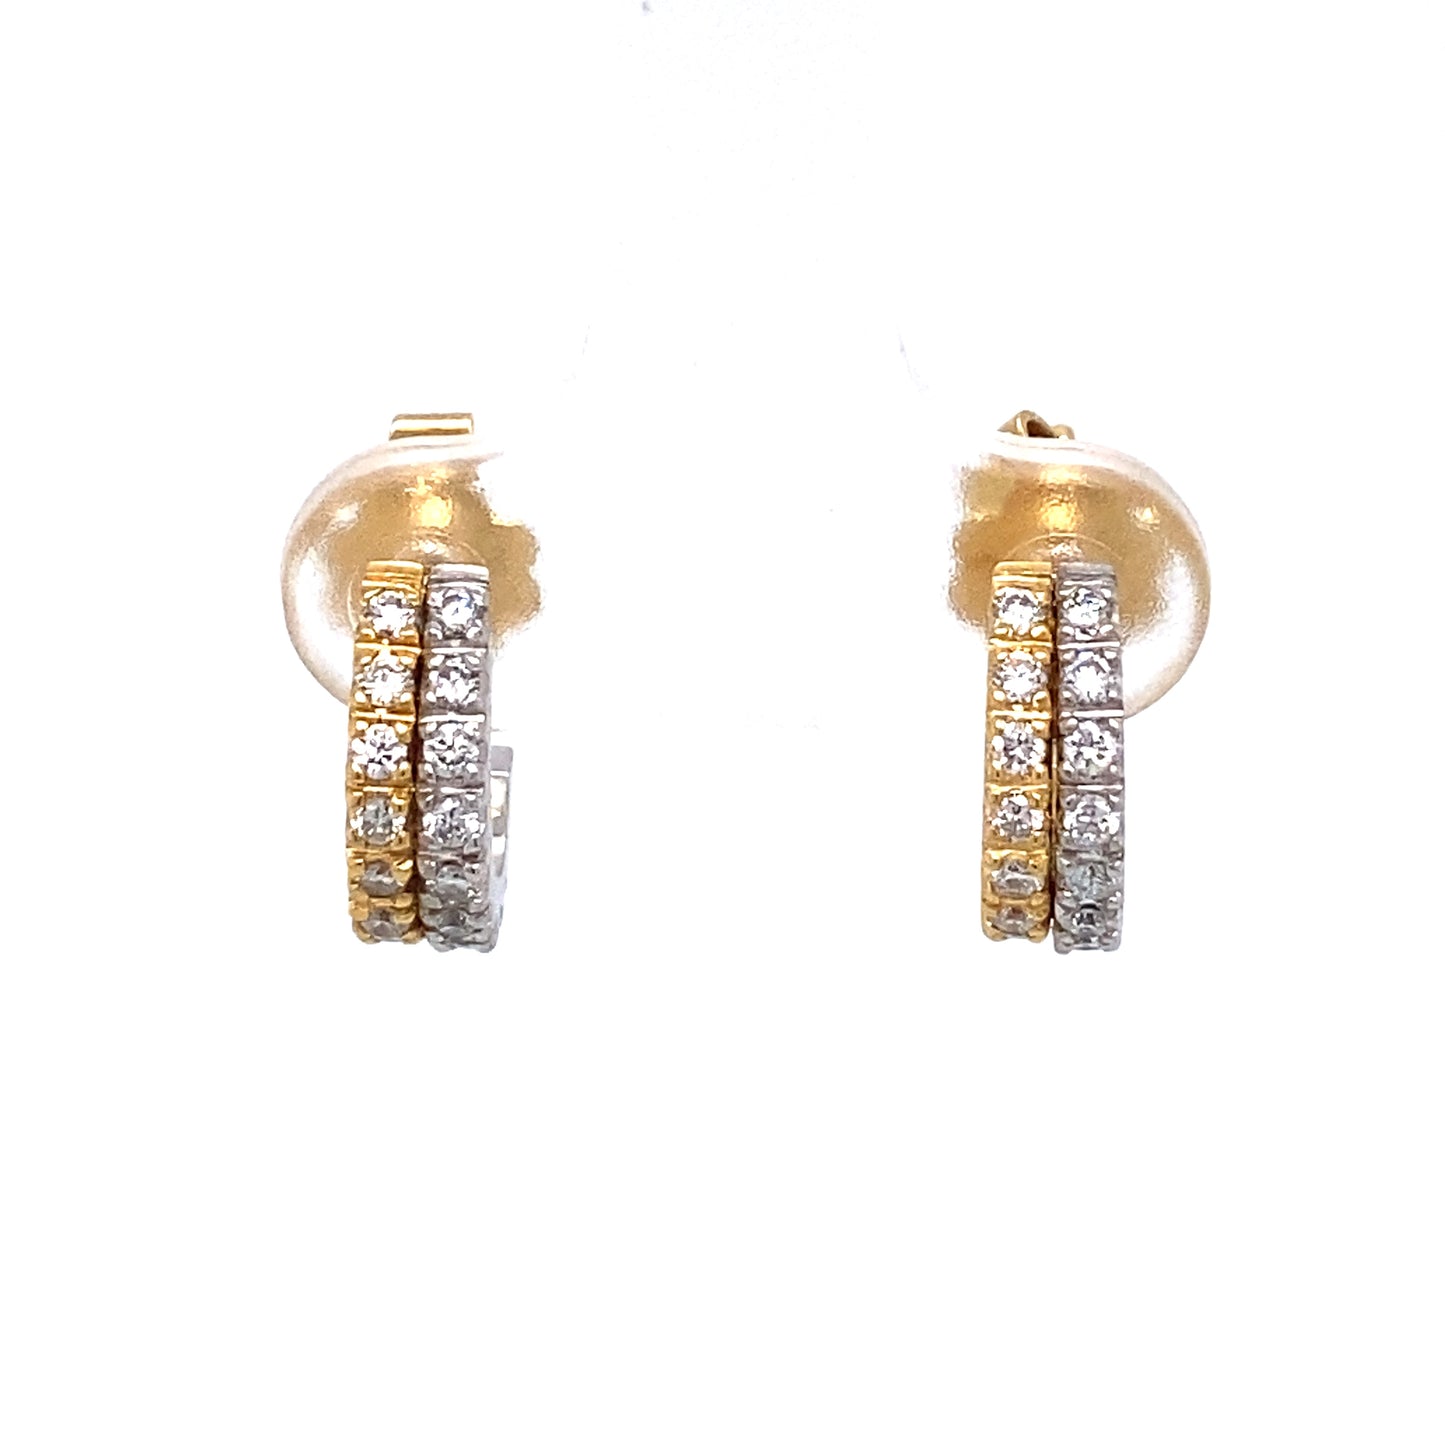 Circa 1950 Two-Tone J Hoop Earrings in 18K White and Yellow Gold